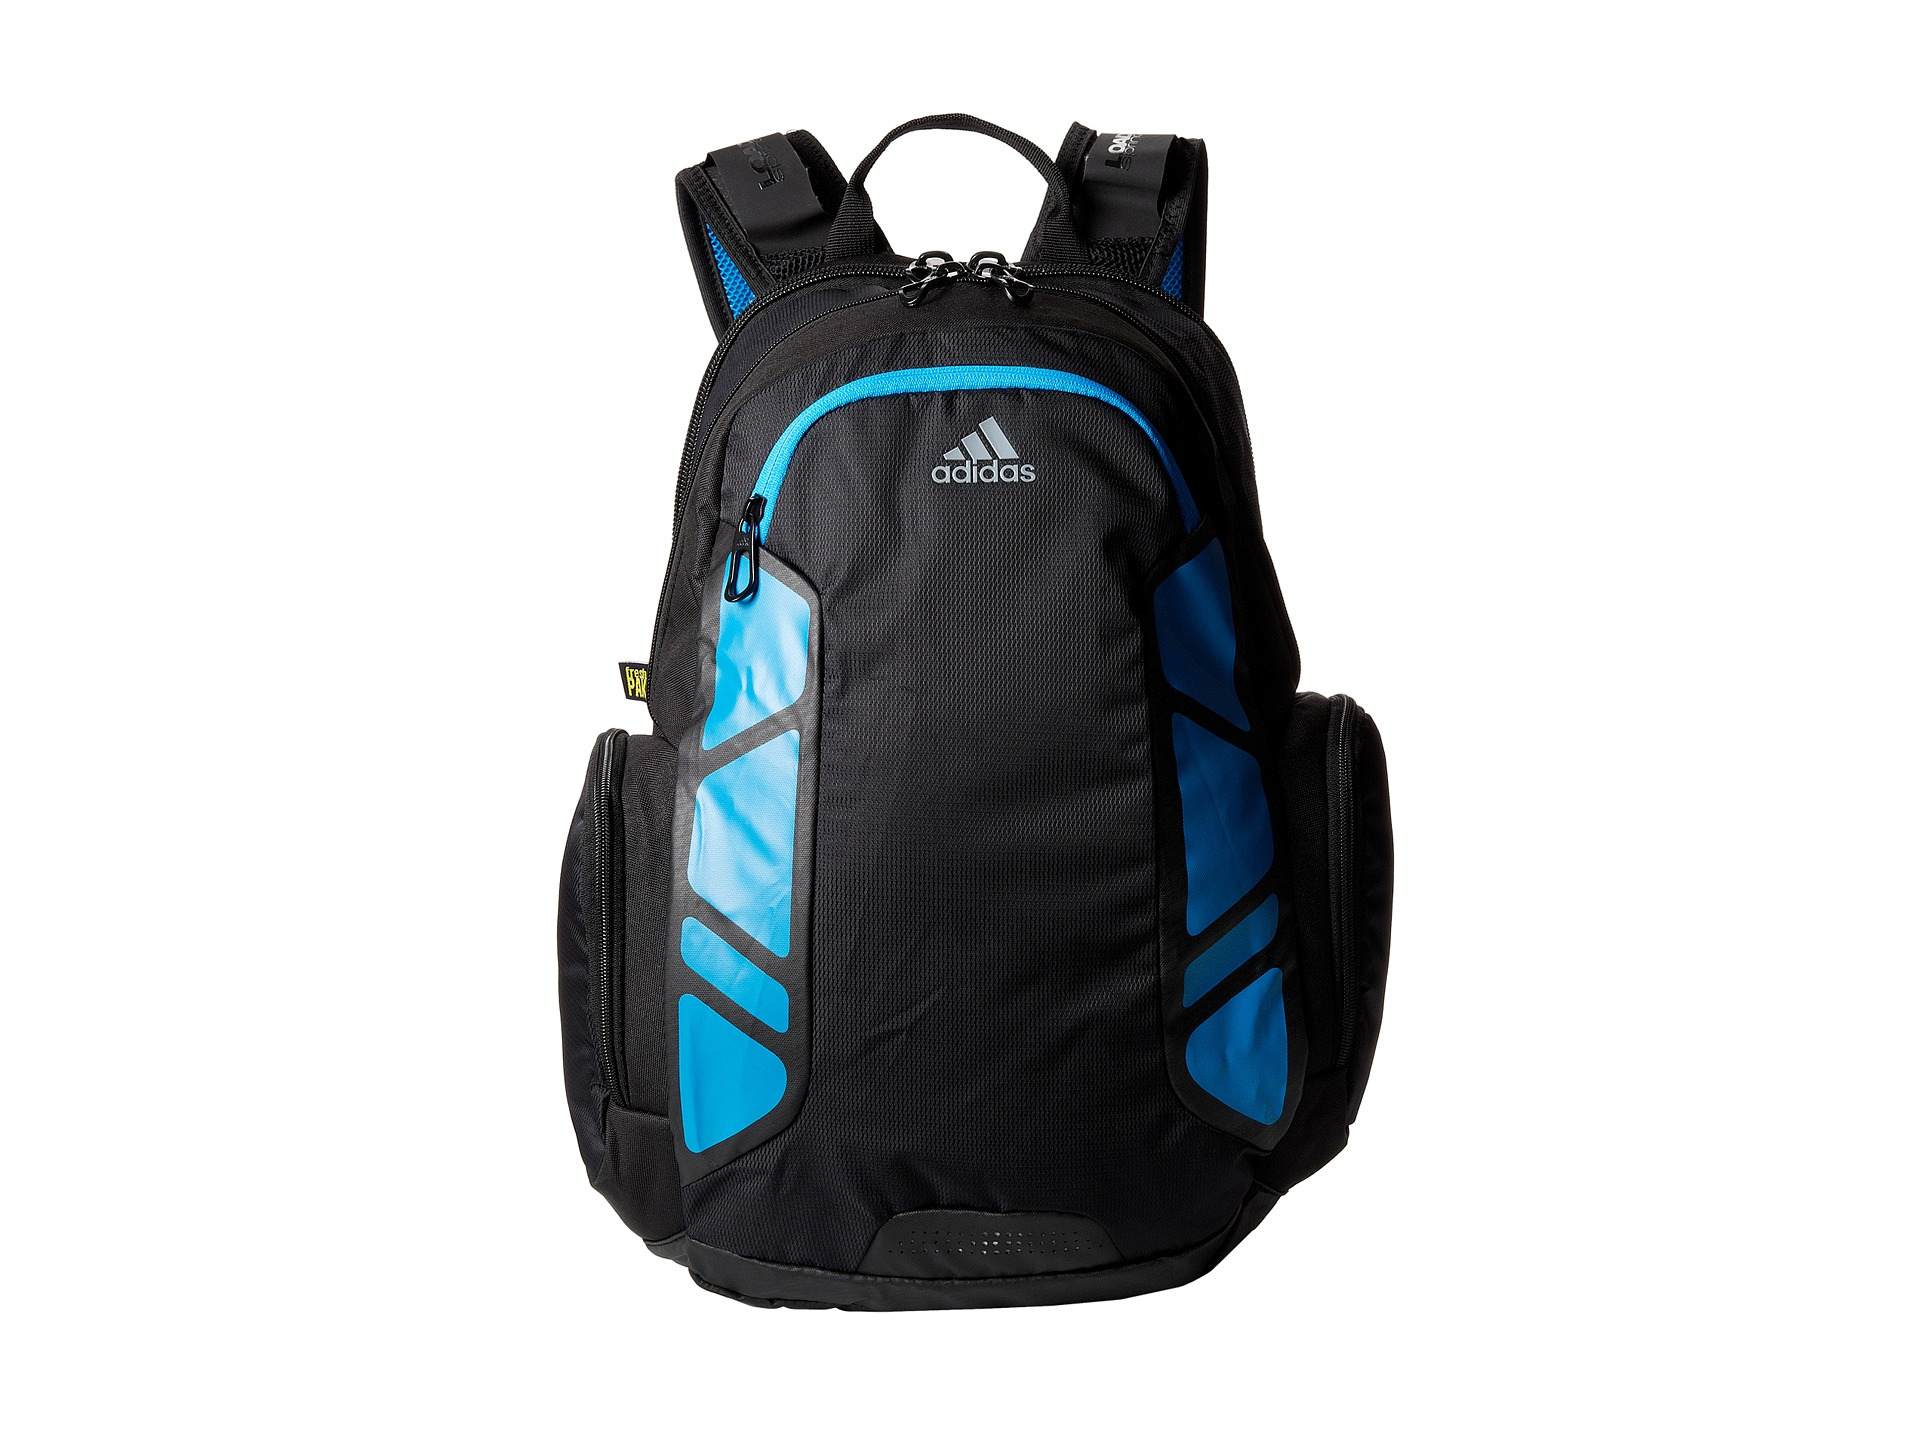 adidas climacool speed 2 backpack